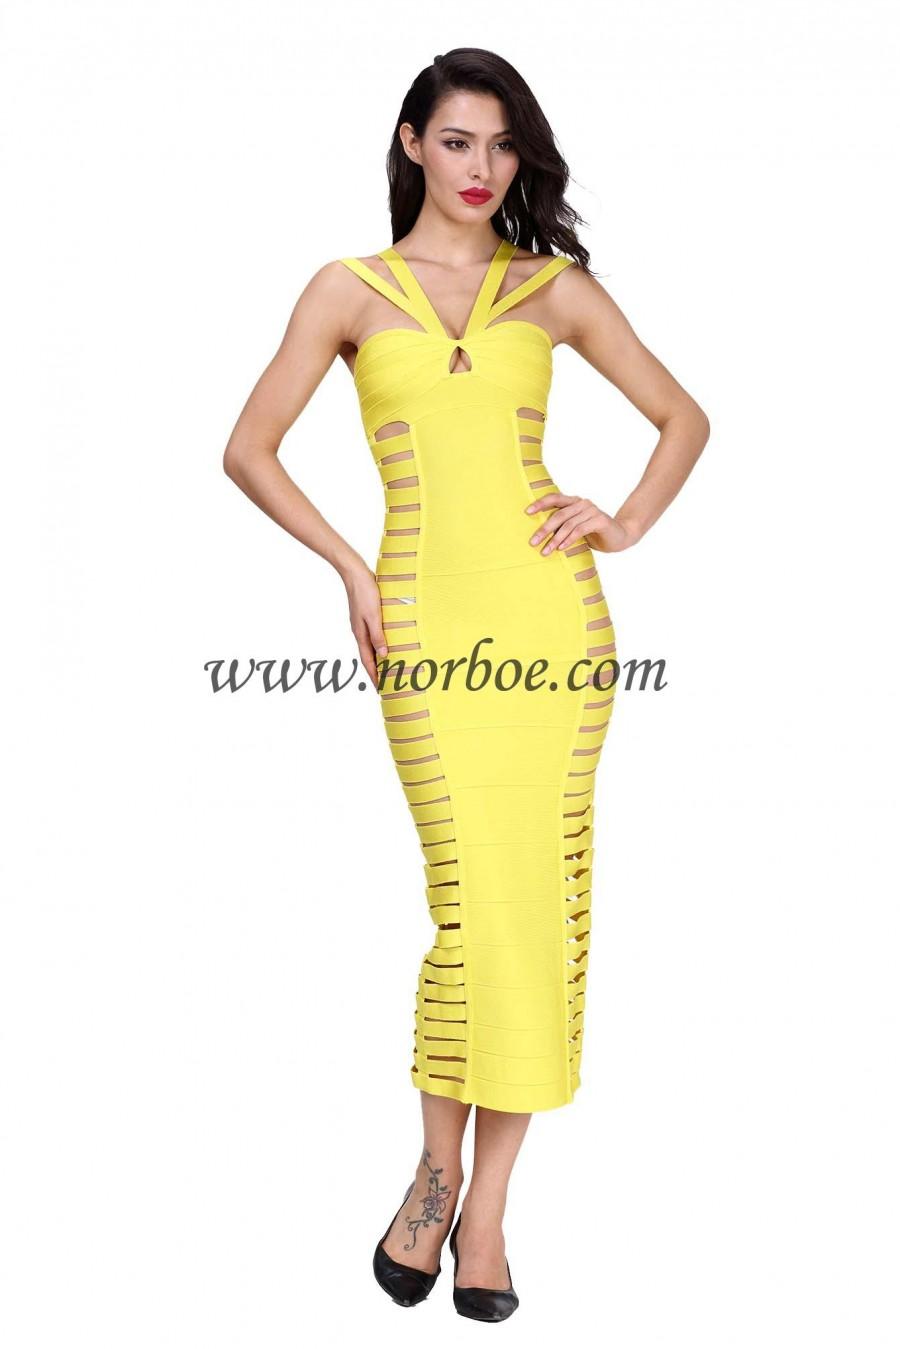 Wedding - Norboe Yellow Maxi Evening Party Dress